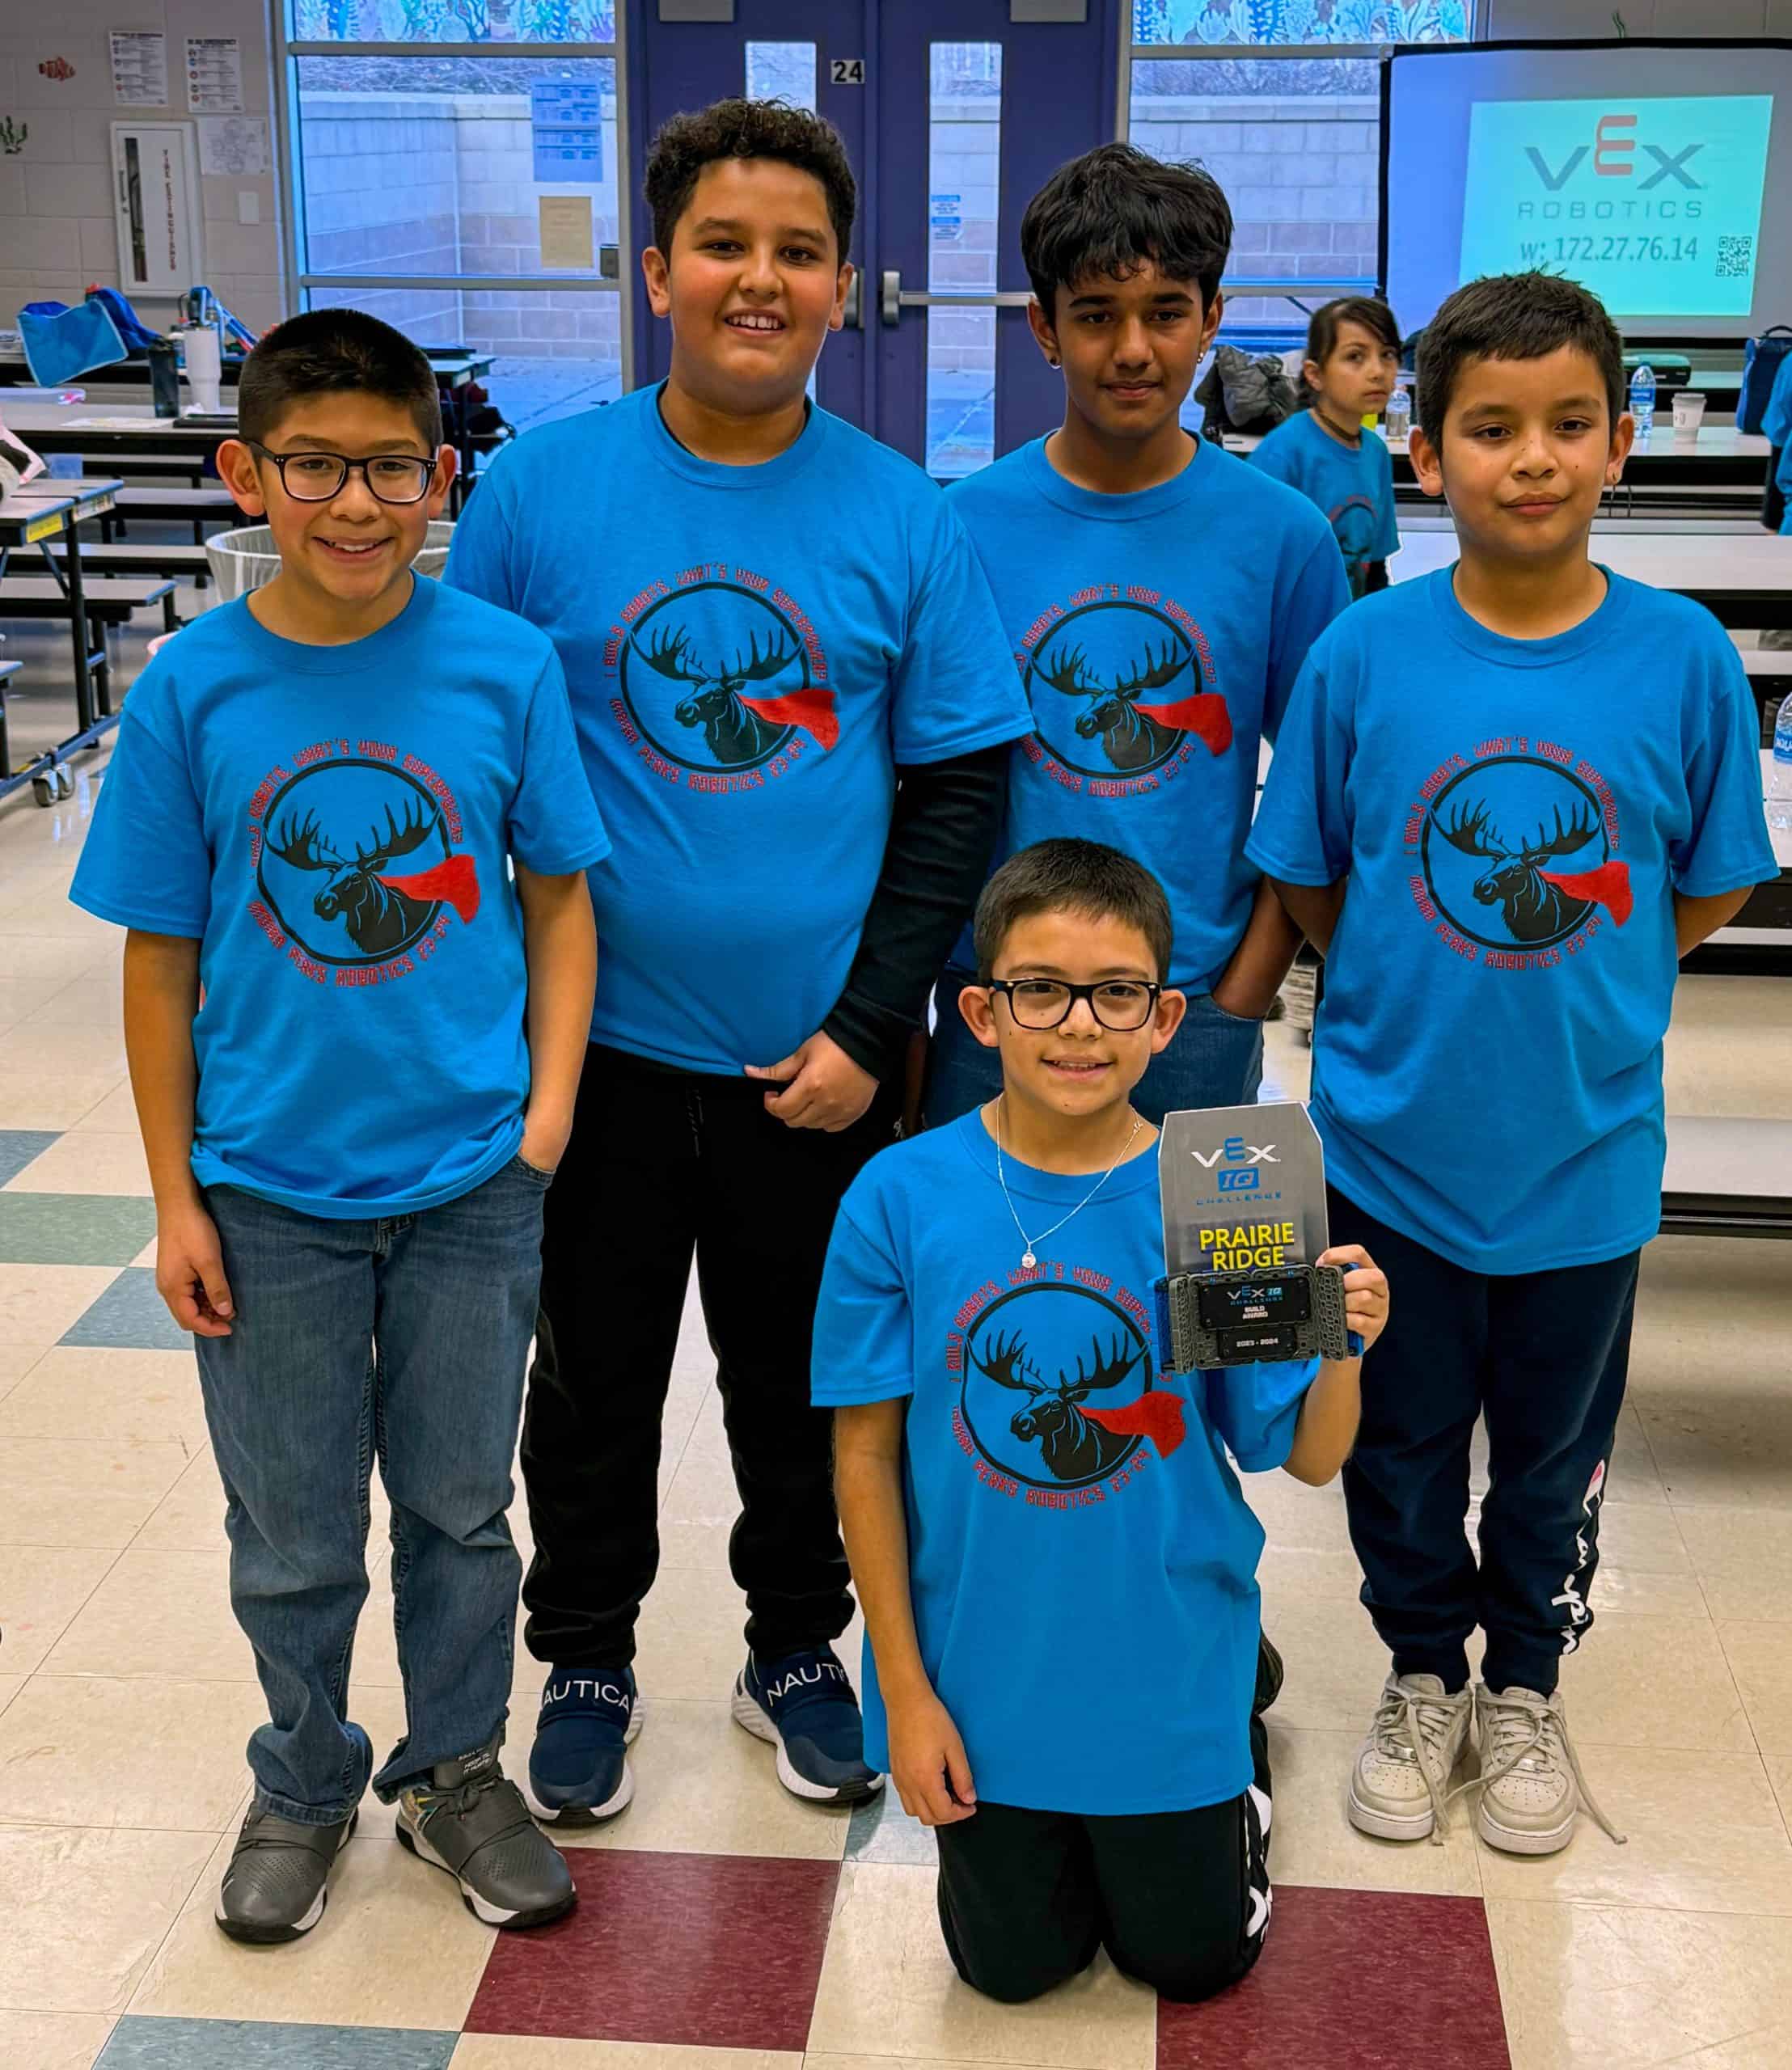 Indian Peaks Elementary Robotics Team Gearing Up for State Competition